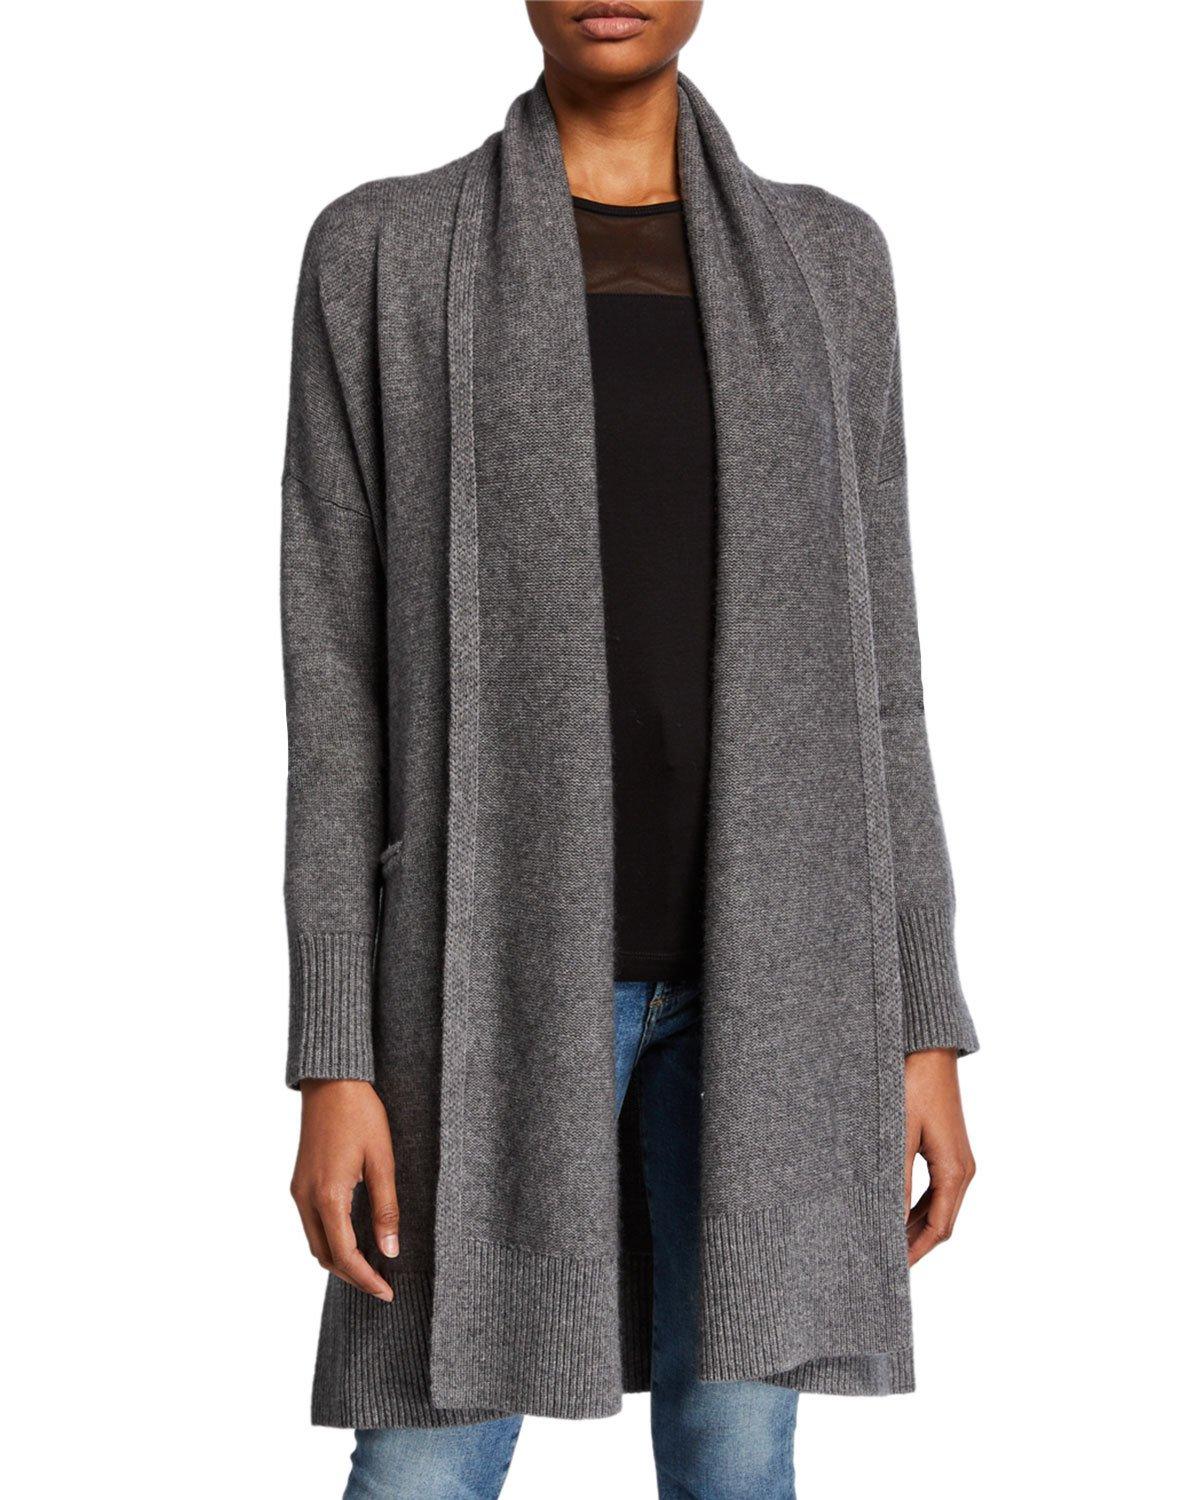 Co. Wool-cashmere Robe Cardigan in Gray - Lyst